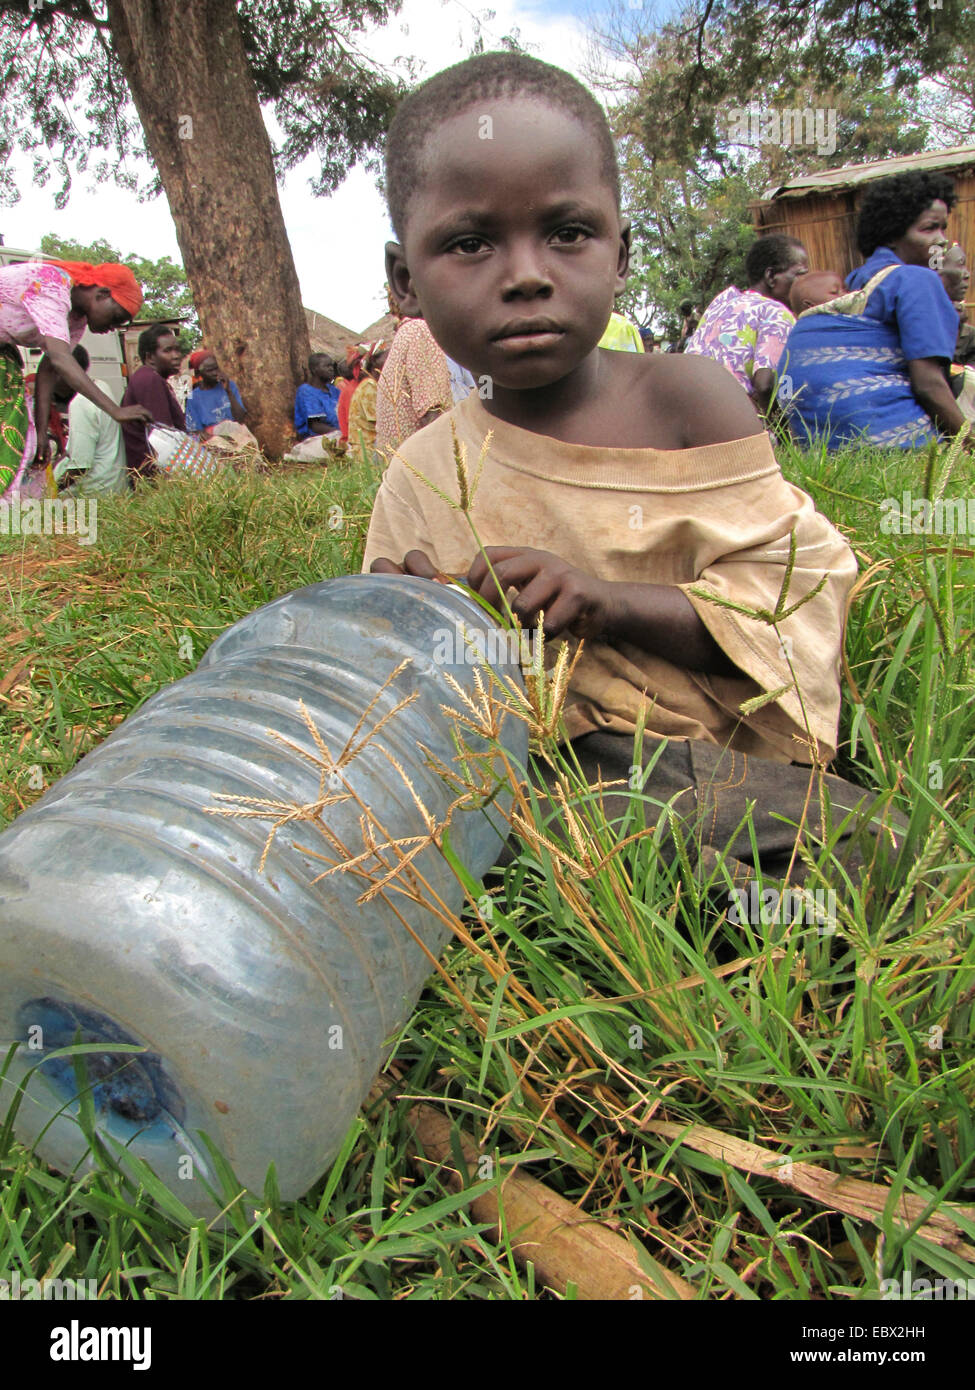 refugee camp for internally displaced people in northern Uganda around Gulu, simple mud house in the background, boy with plastic bottle is waiting for water, Uganda, Gulu Stock Photo